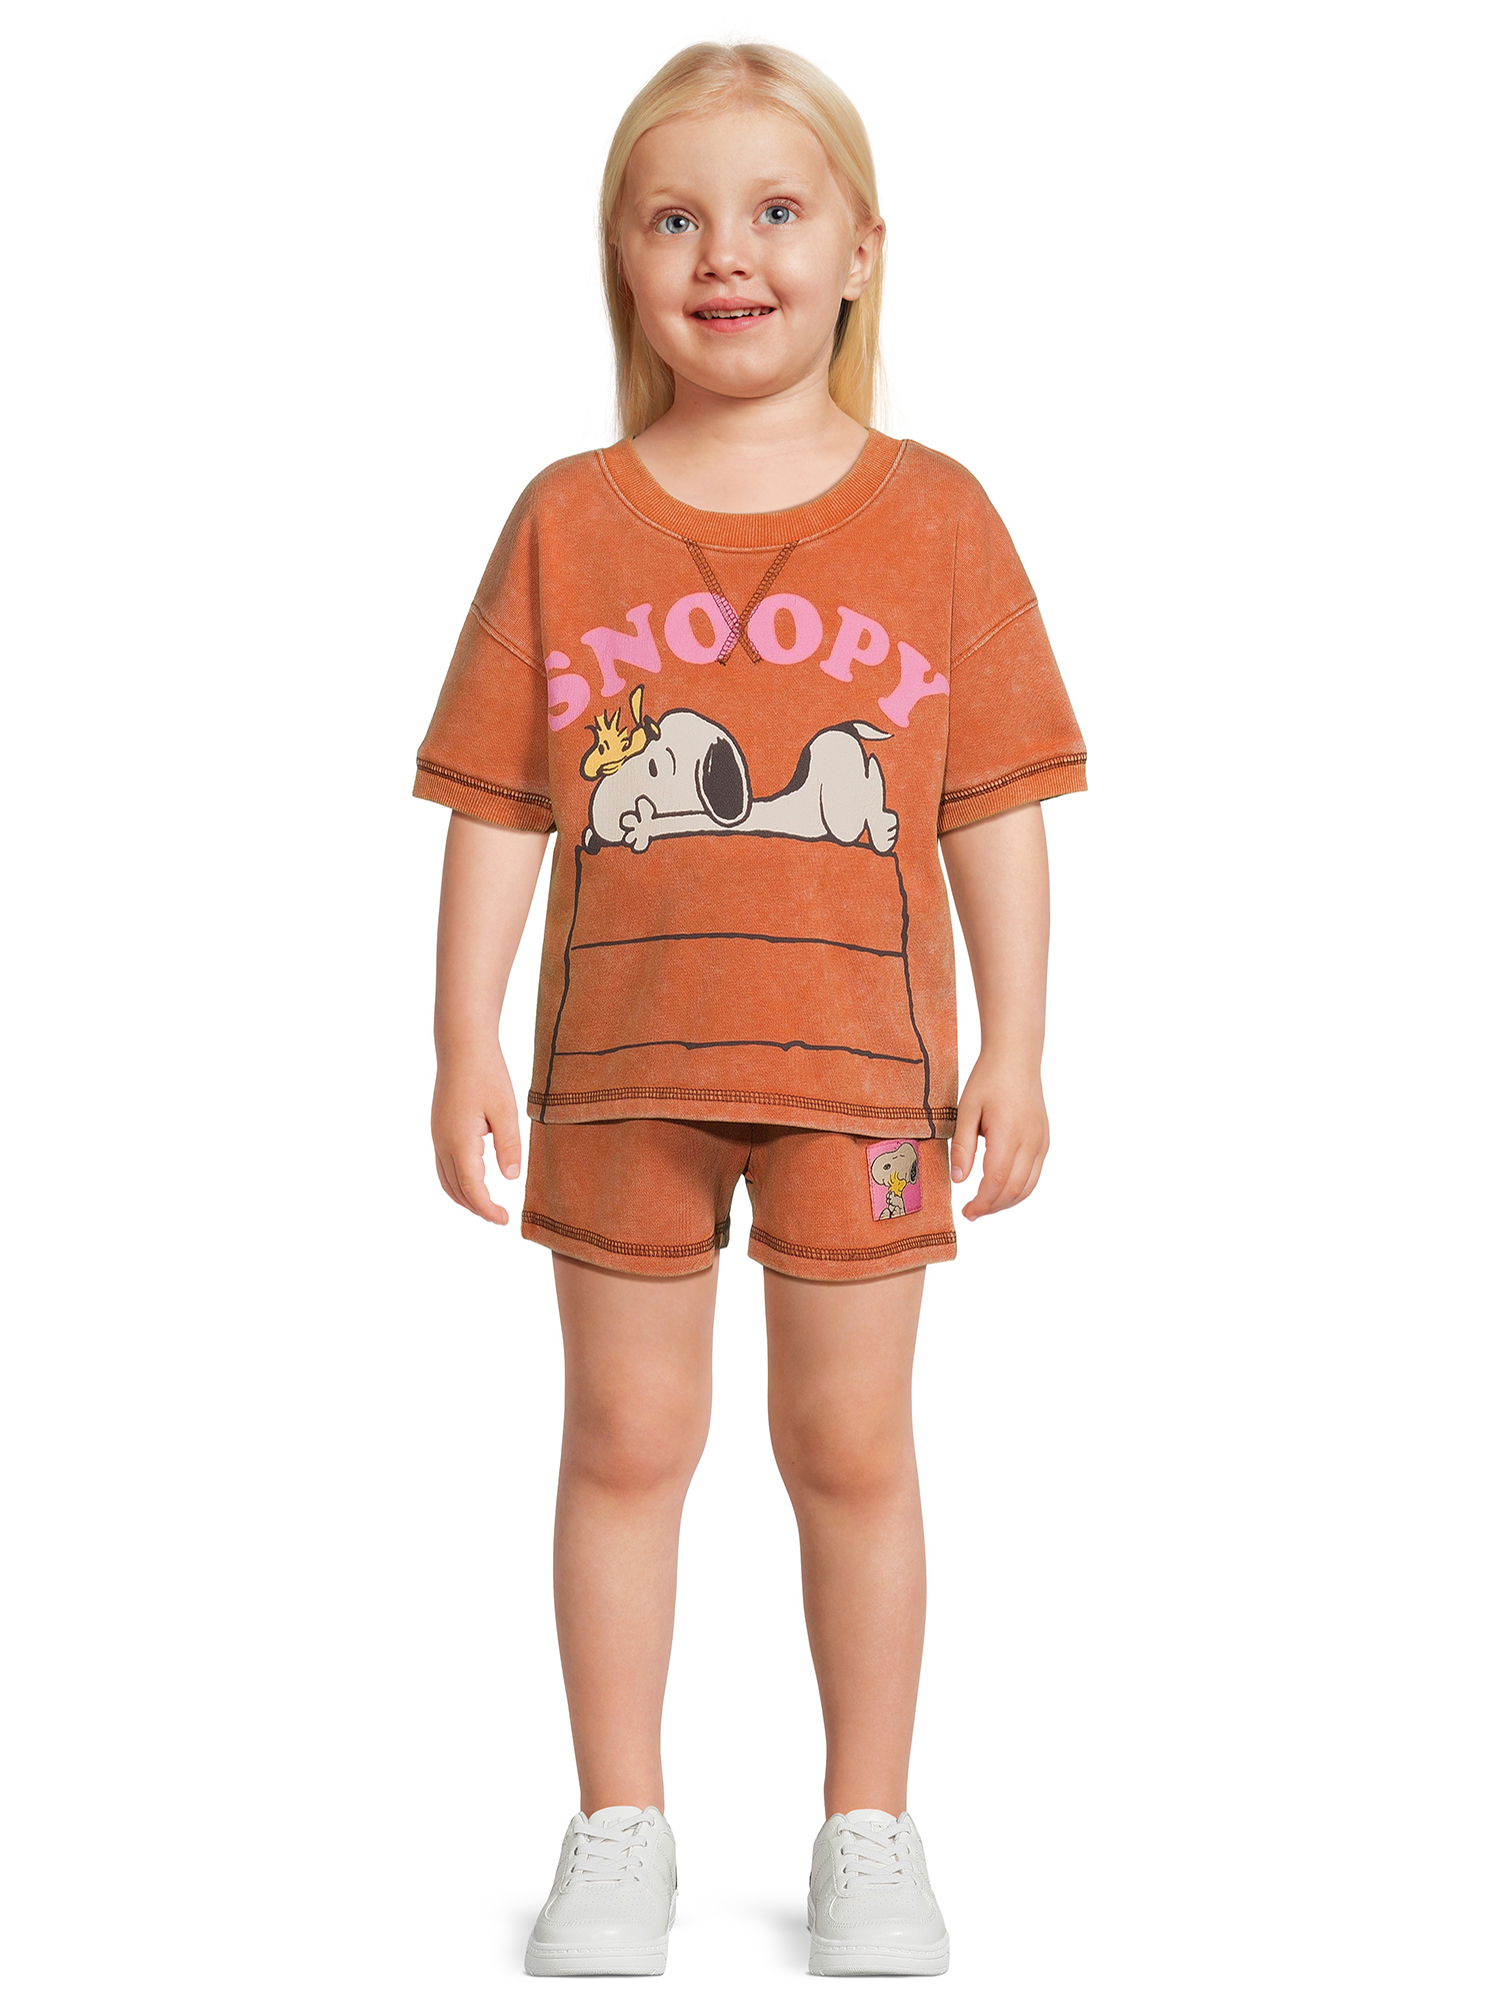 Snoopy Toddler Girls Tee and Shorts Set, 2-Piece, Sizes 12M-5T - image 2 of 12